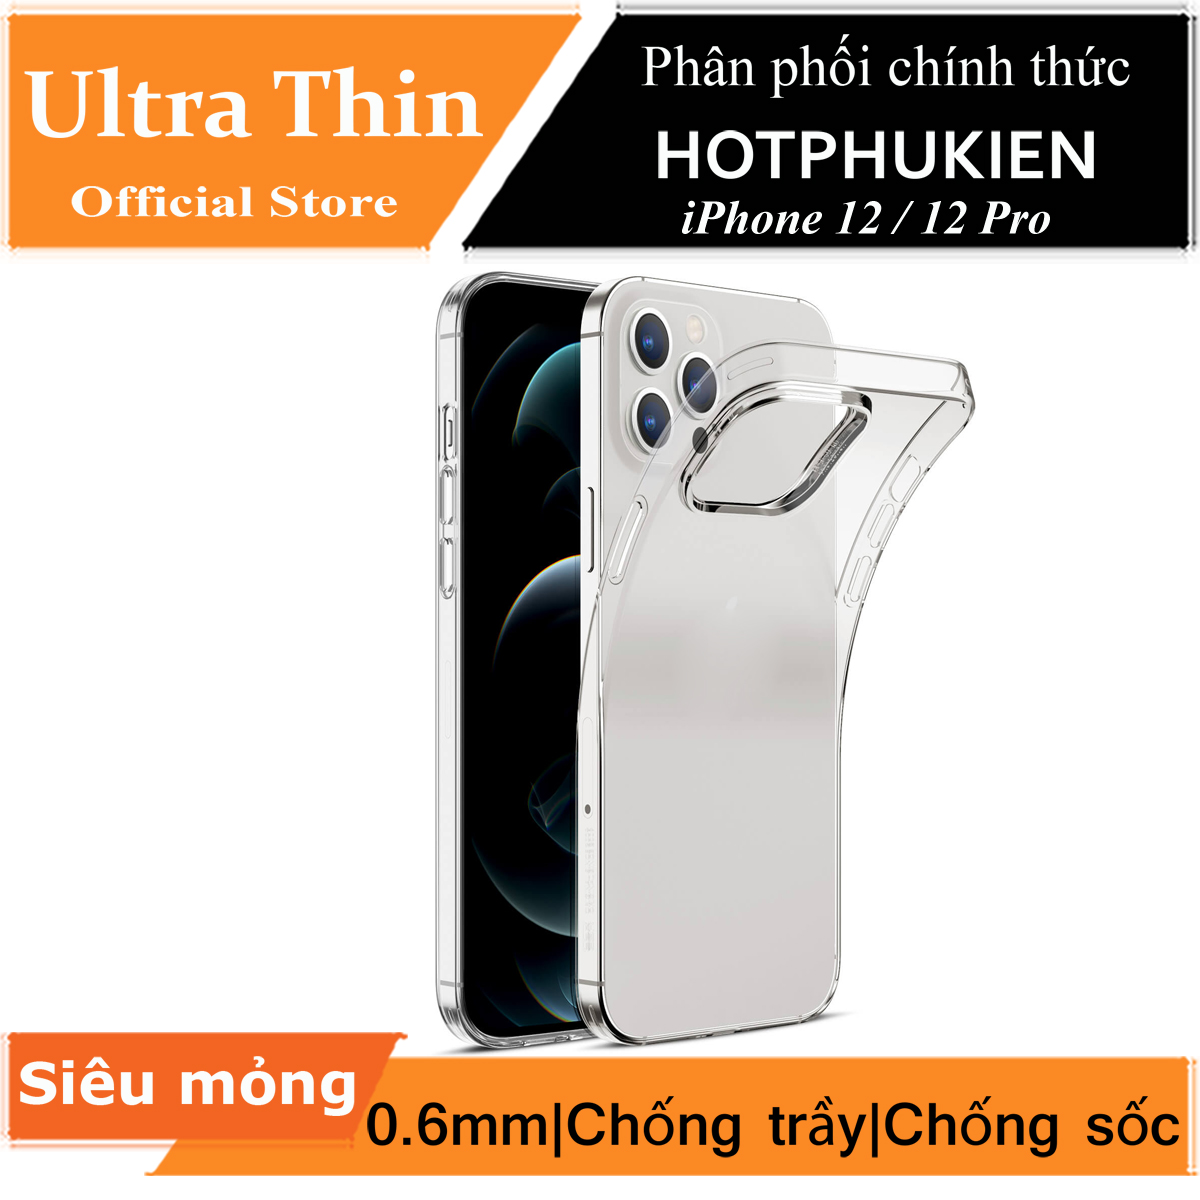 Ốp lưng dẻo silicon trong suốt cho iPhone 12 / iPhone 12 Pro hiệu Ultra Thin